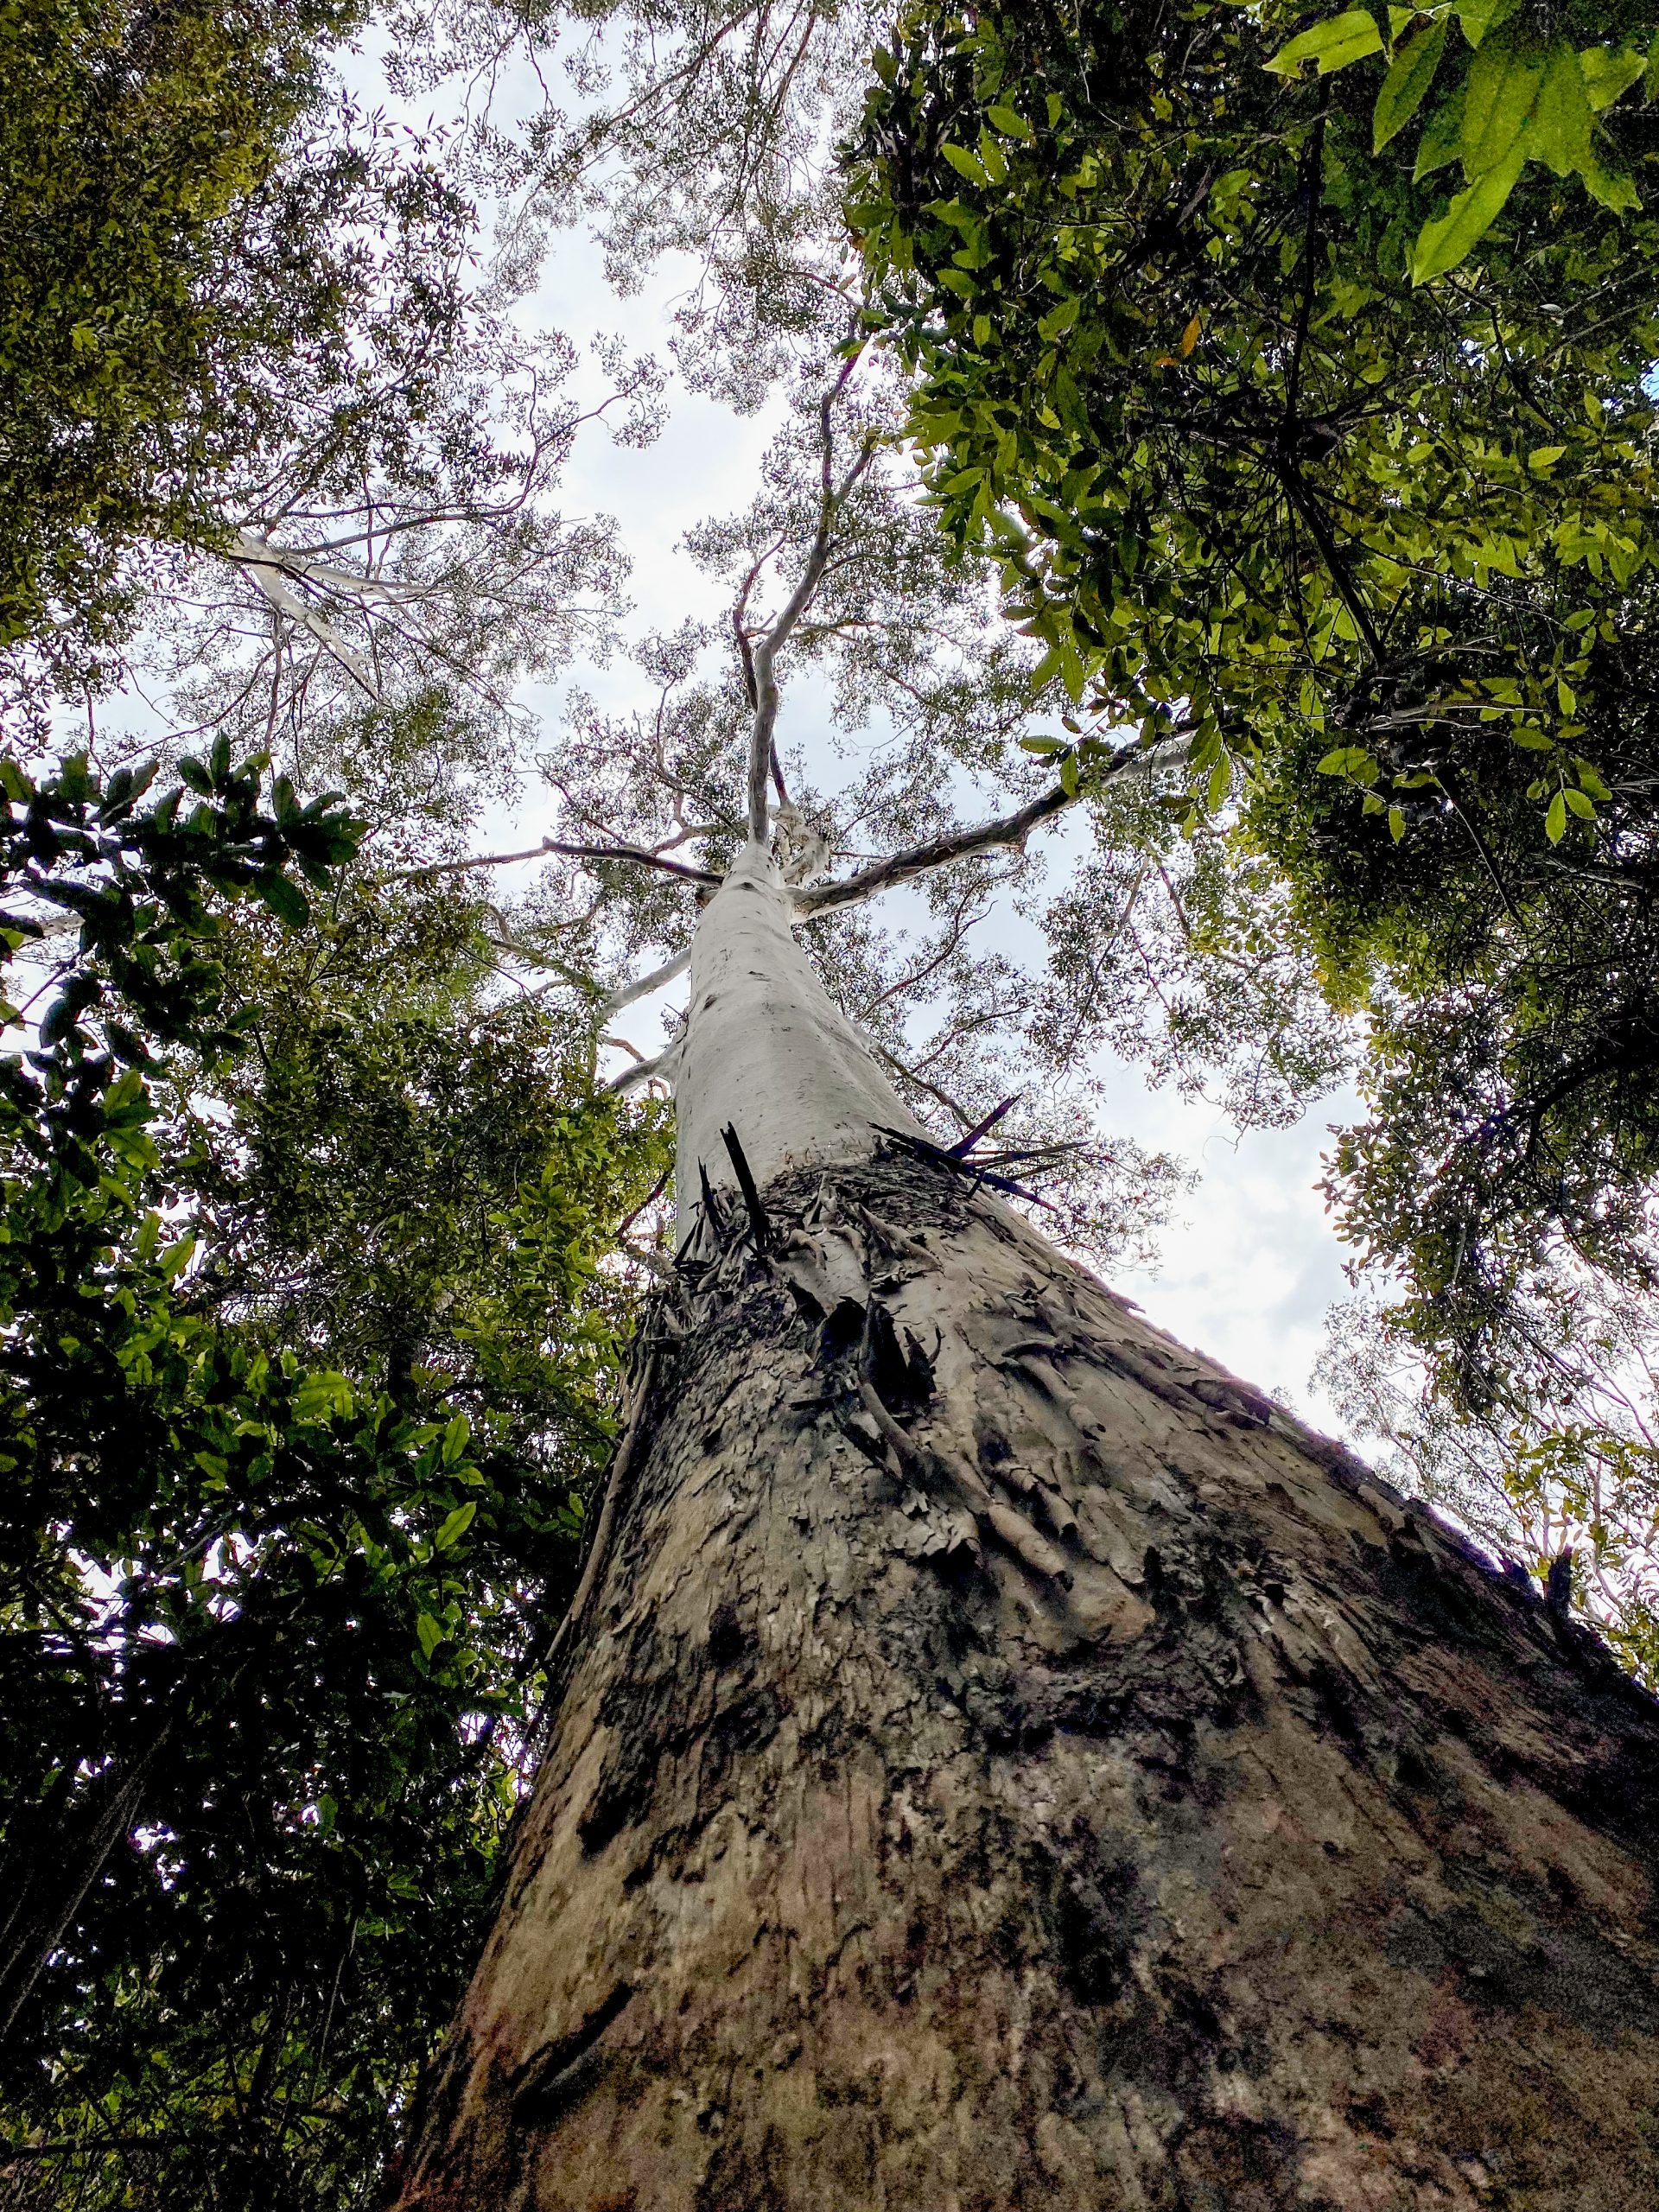 Point of view looking from the ground up of a tree, in Dorrigo National Park. Photo: Tim Ashelford